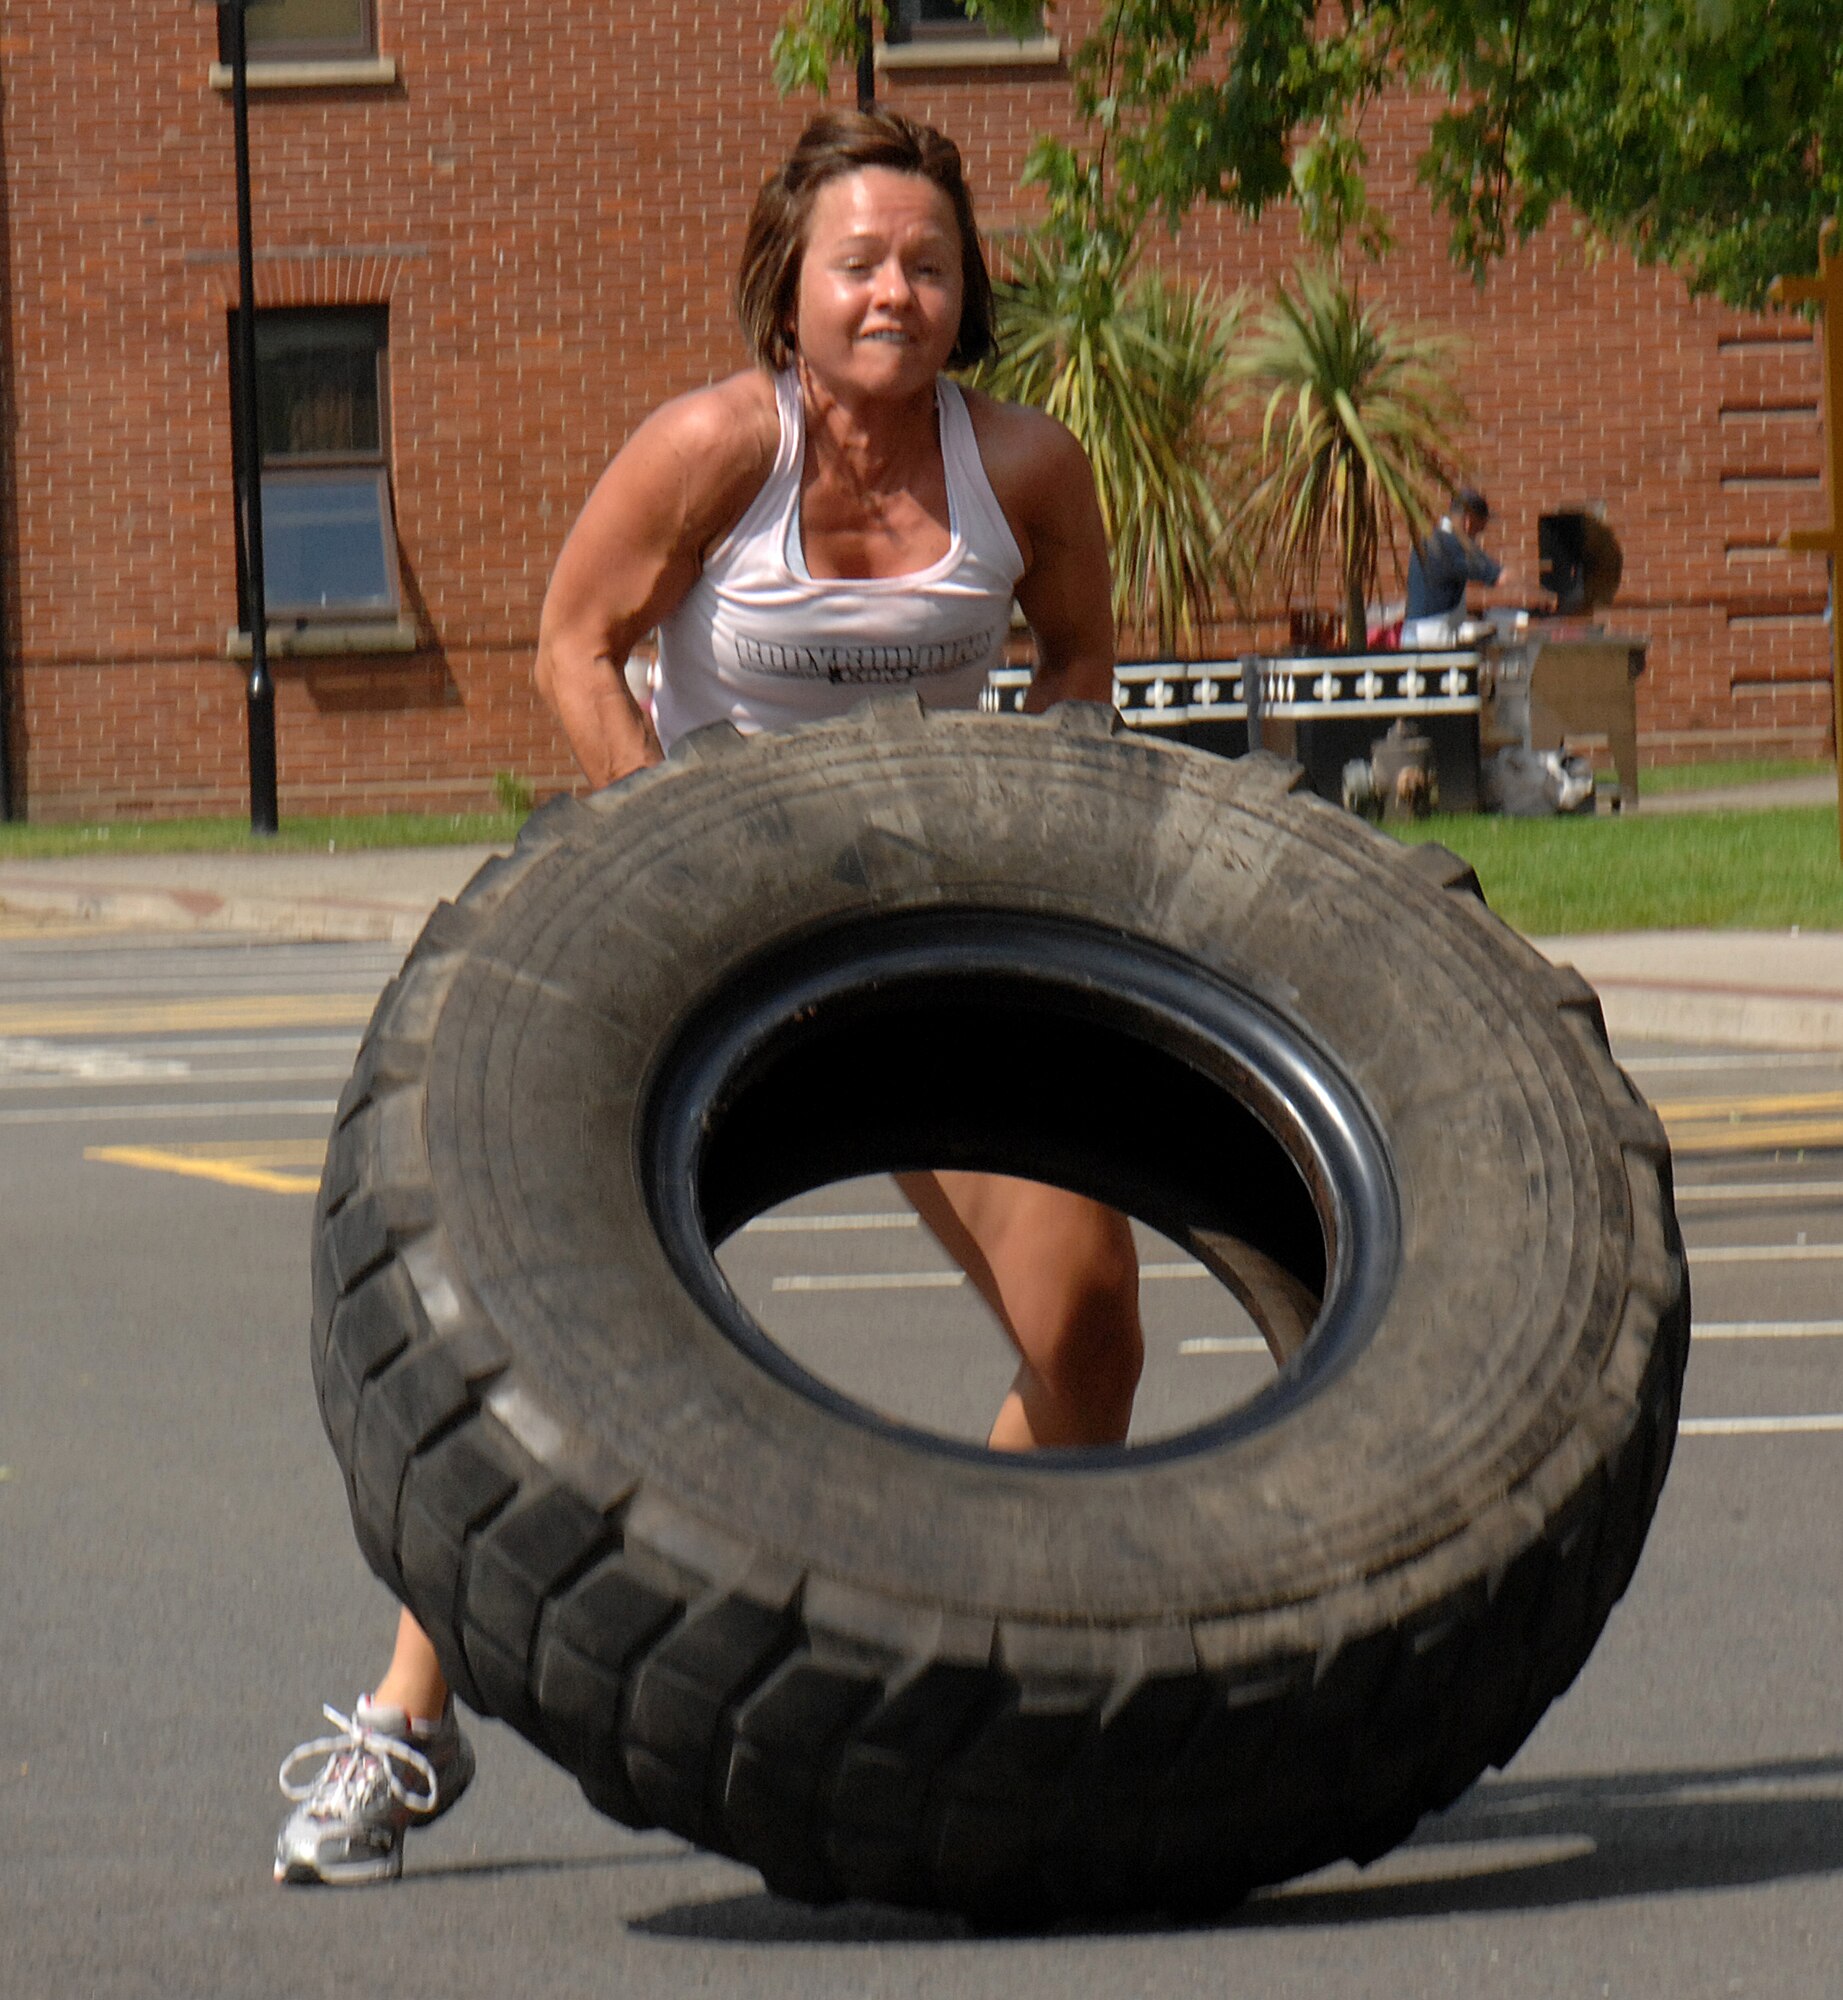 Angie Paul, a military spouse, flips a heavy tire for 75 feet as part of the fitness expo at RAF Mildenhall, England, May 29, 2009.  The contest was meant to rally excitement about fitness and being outdoors in the English summer weather.  (U.S. Air Force photo by Staff Sgt. Christopher L. Ingersoll)